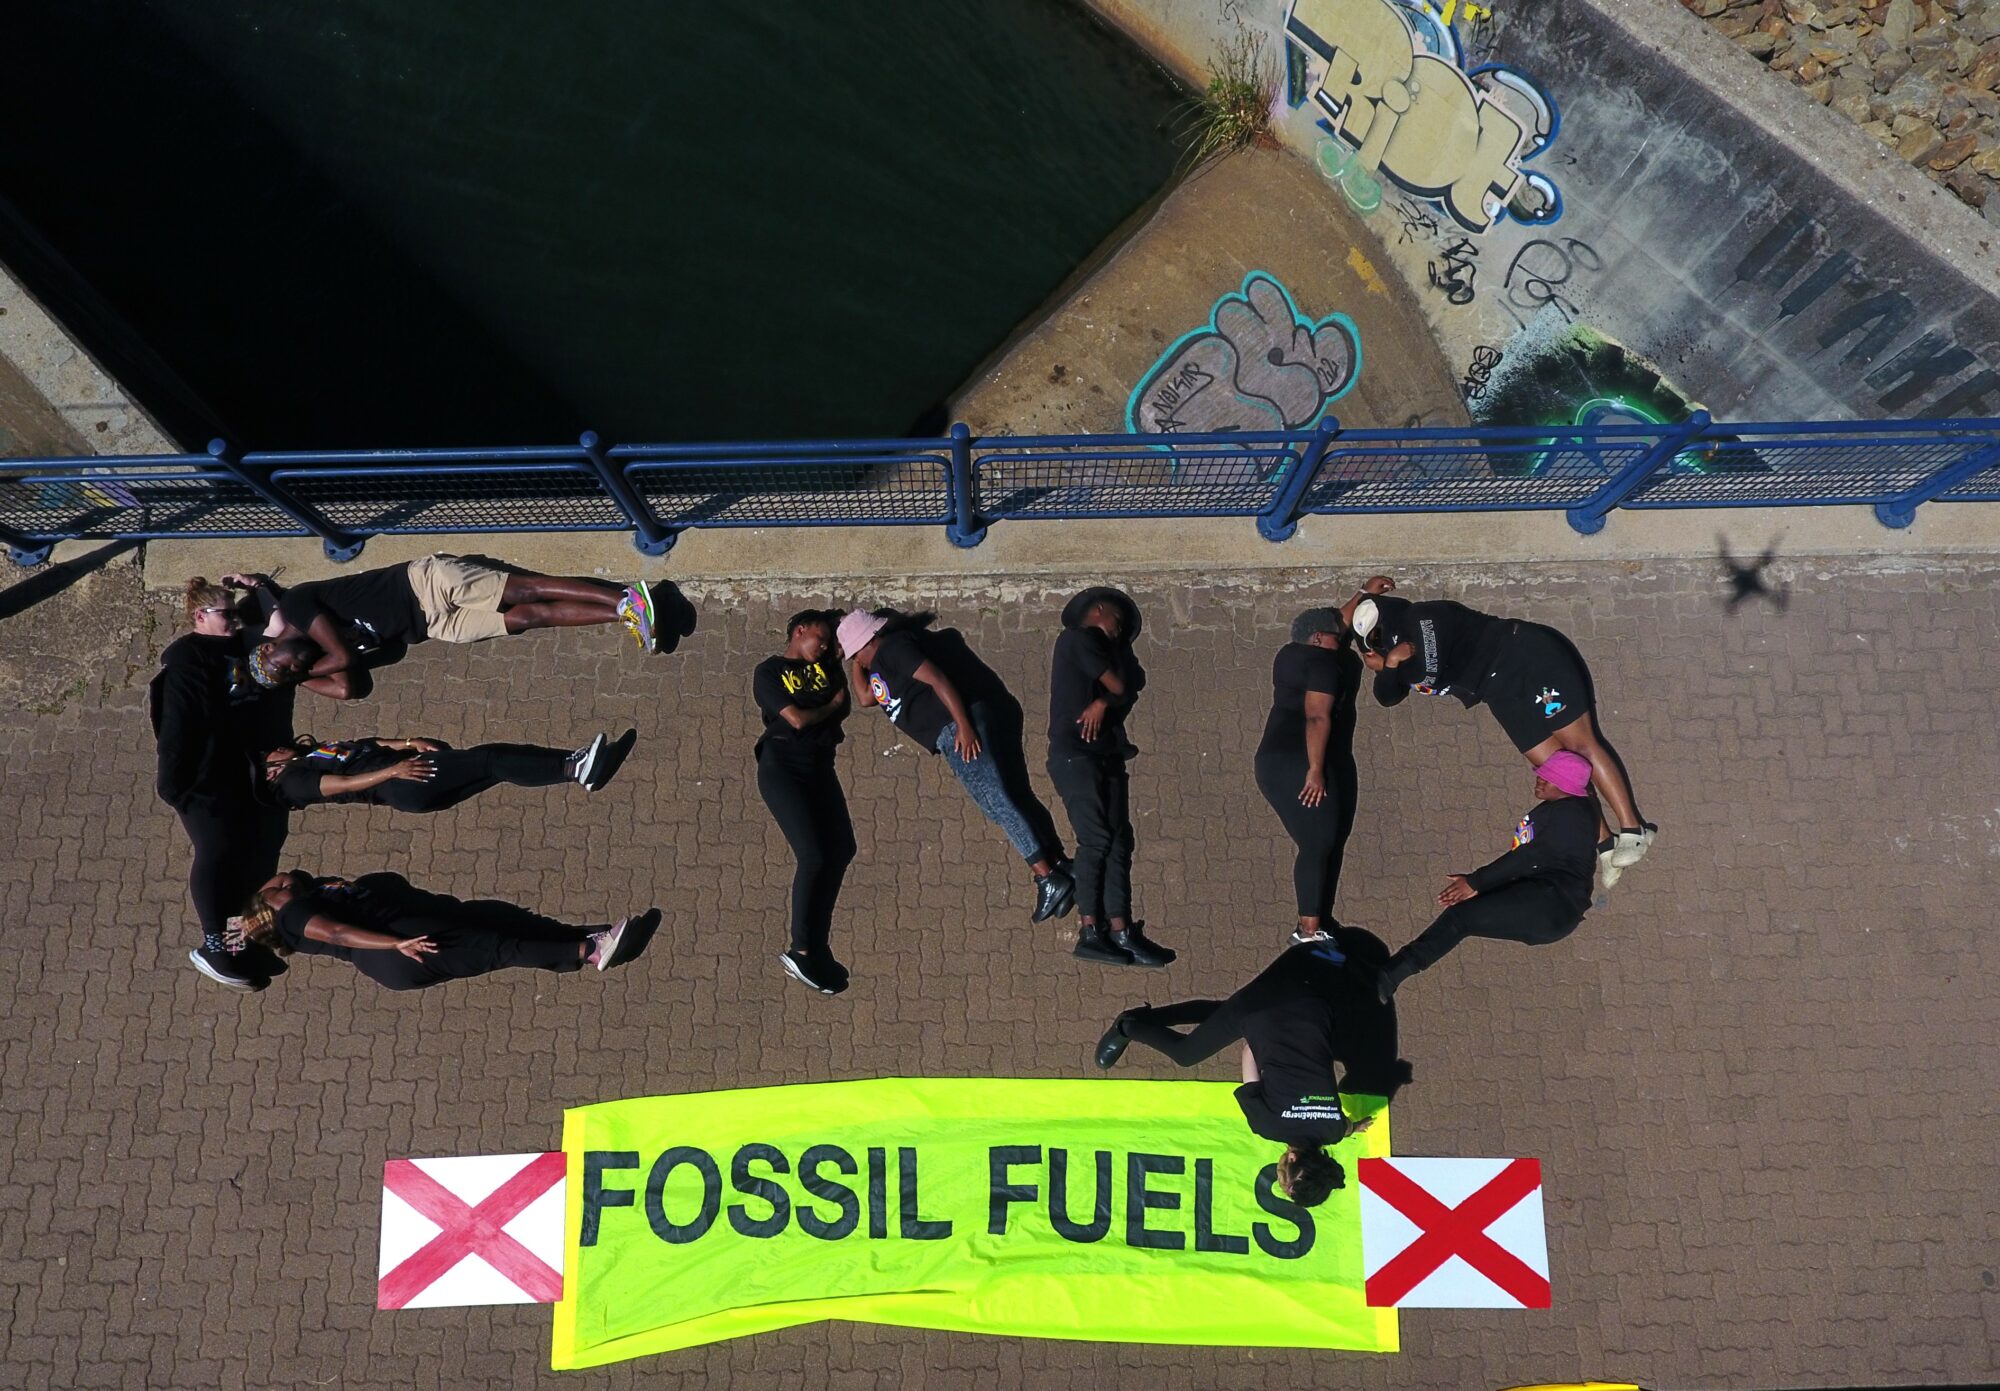 Reasons for Climate Change: Fossil Fuels